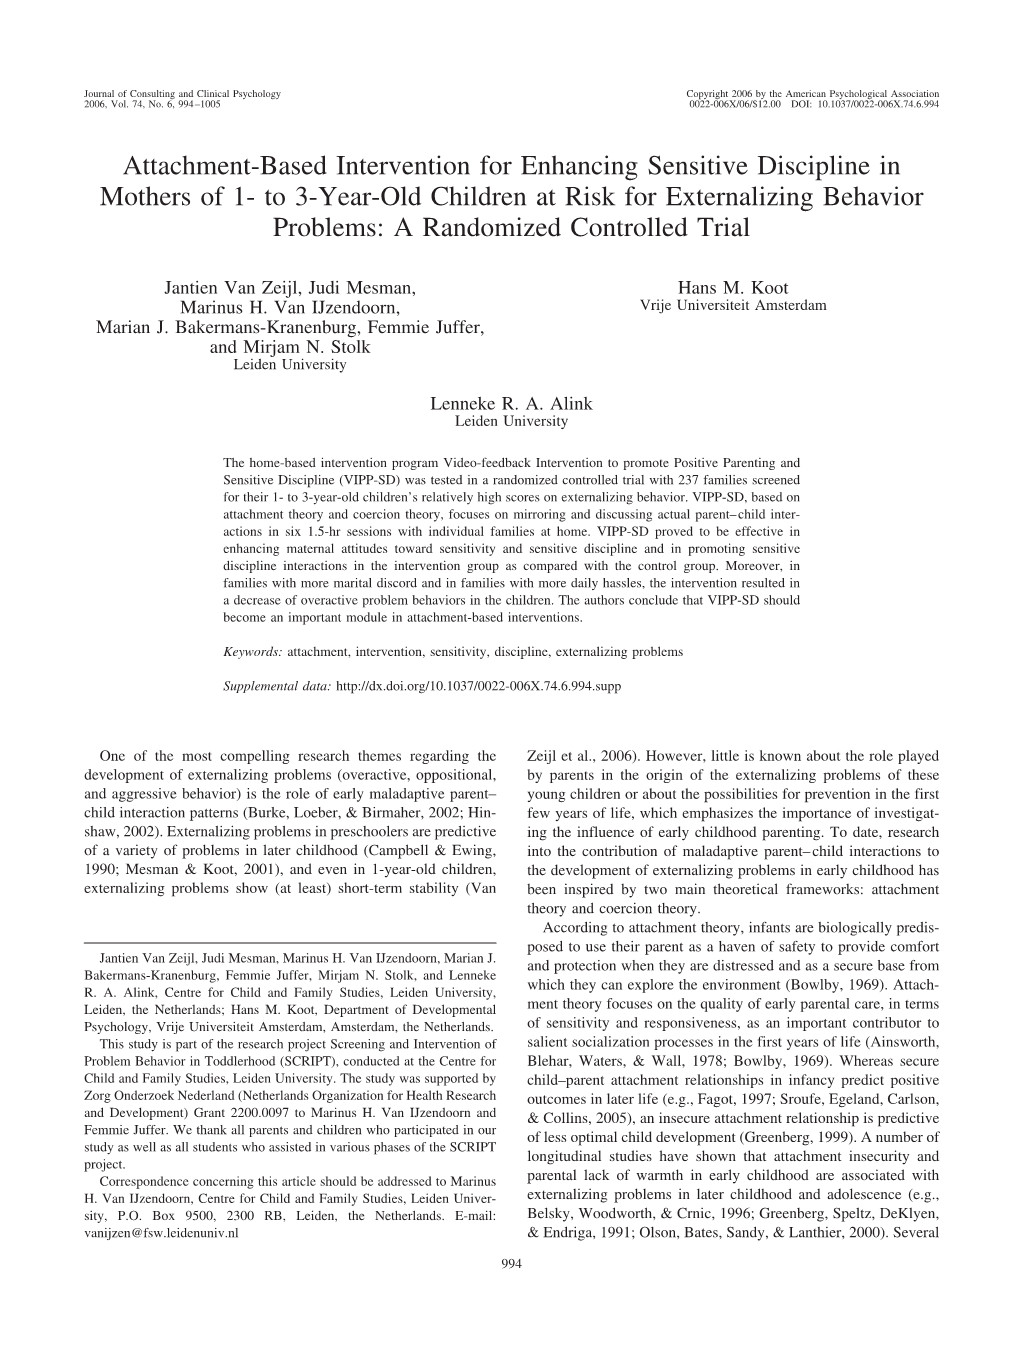 Attachment-Based Intervention for Enhancing Sensitive Discipline In